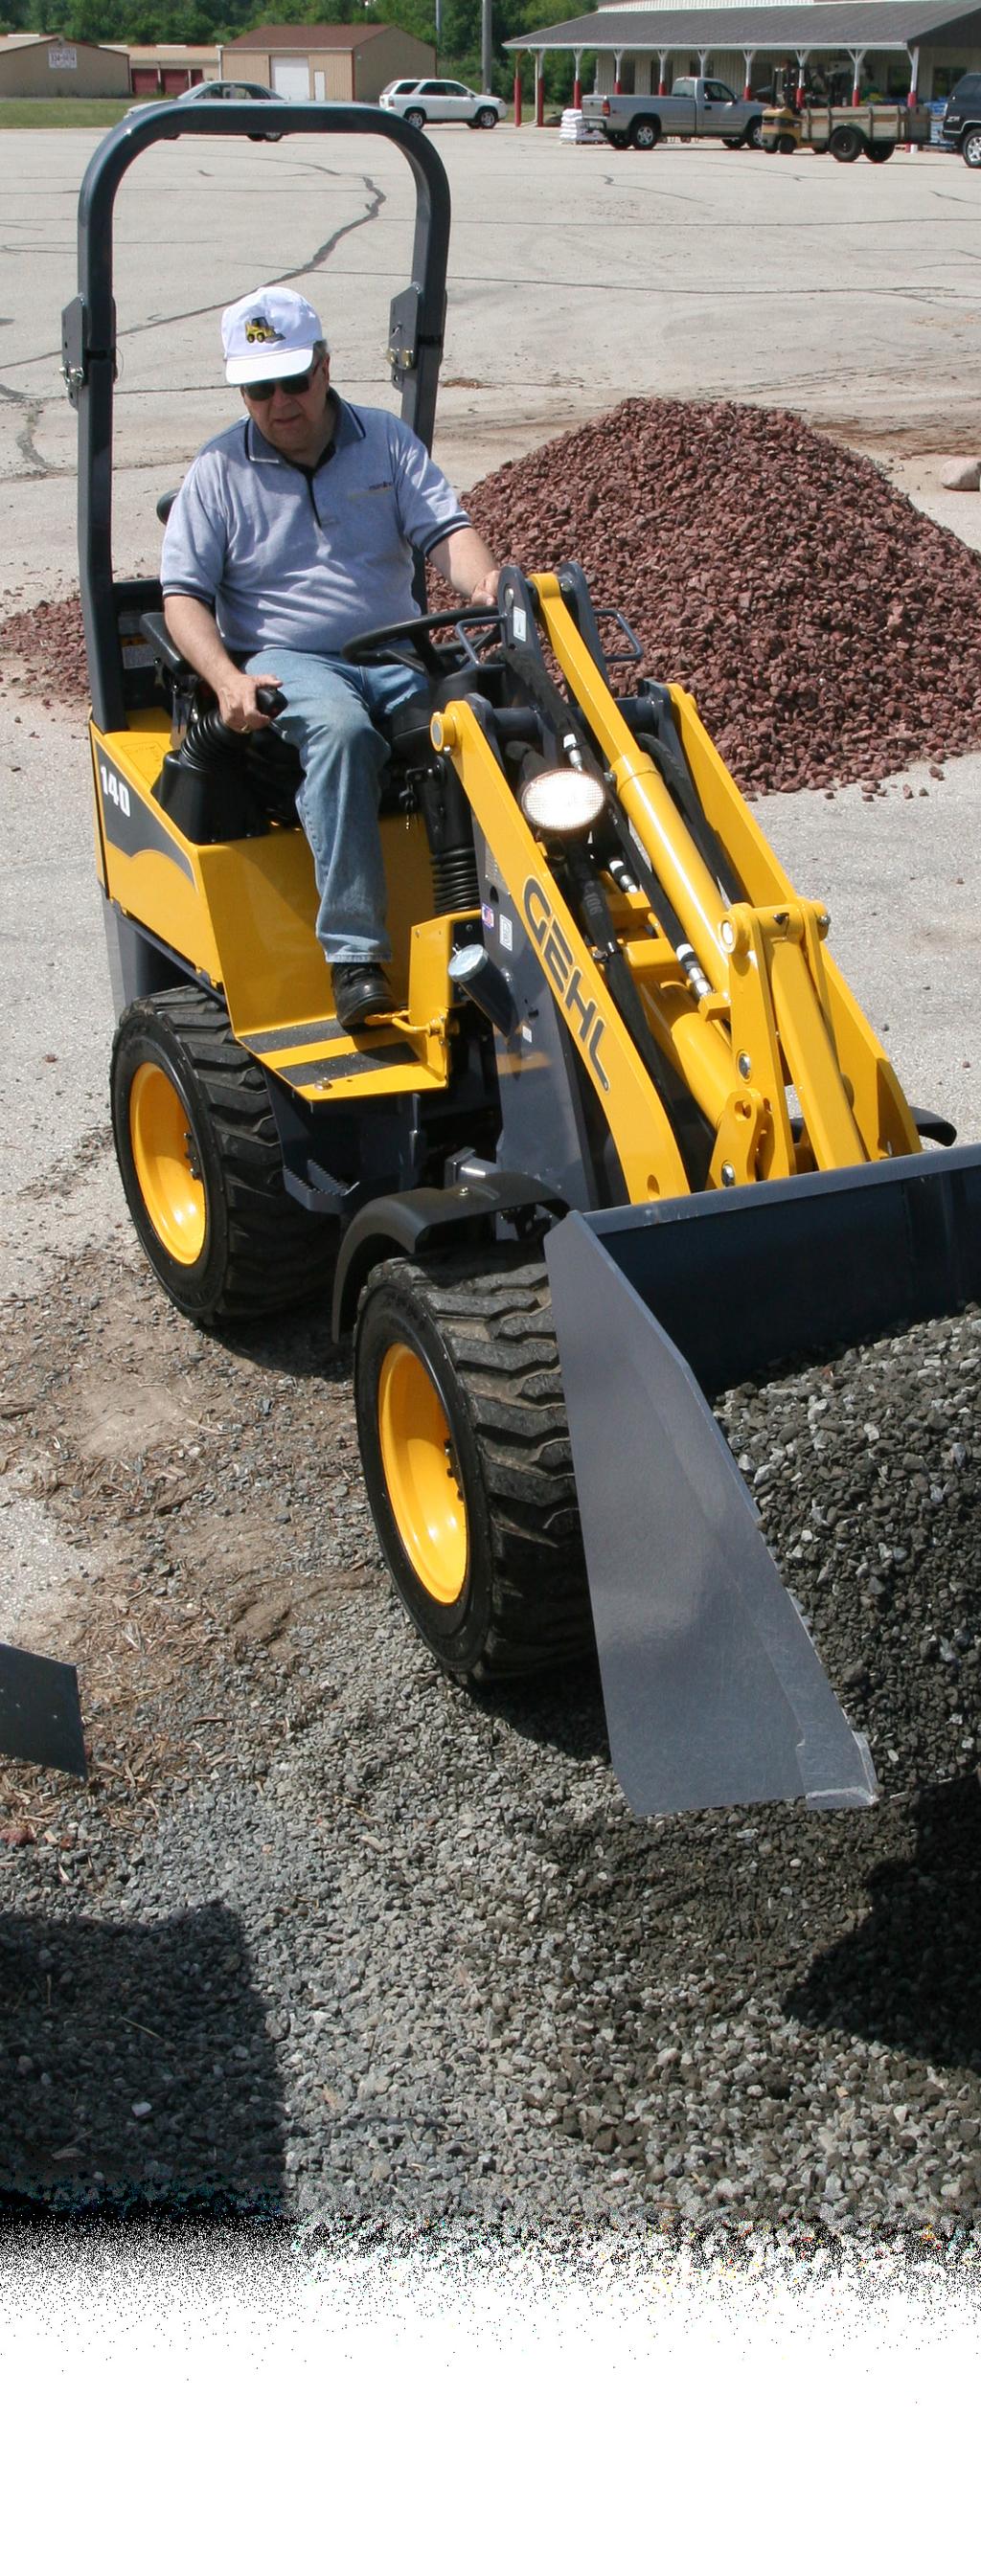 crave FLEXIBILITY? From the farm to the jobsite and everywhere in between, these machines conquer chores of all types.